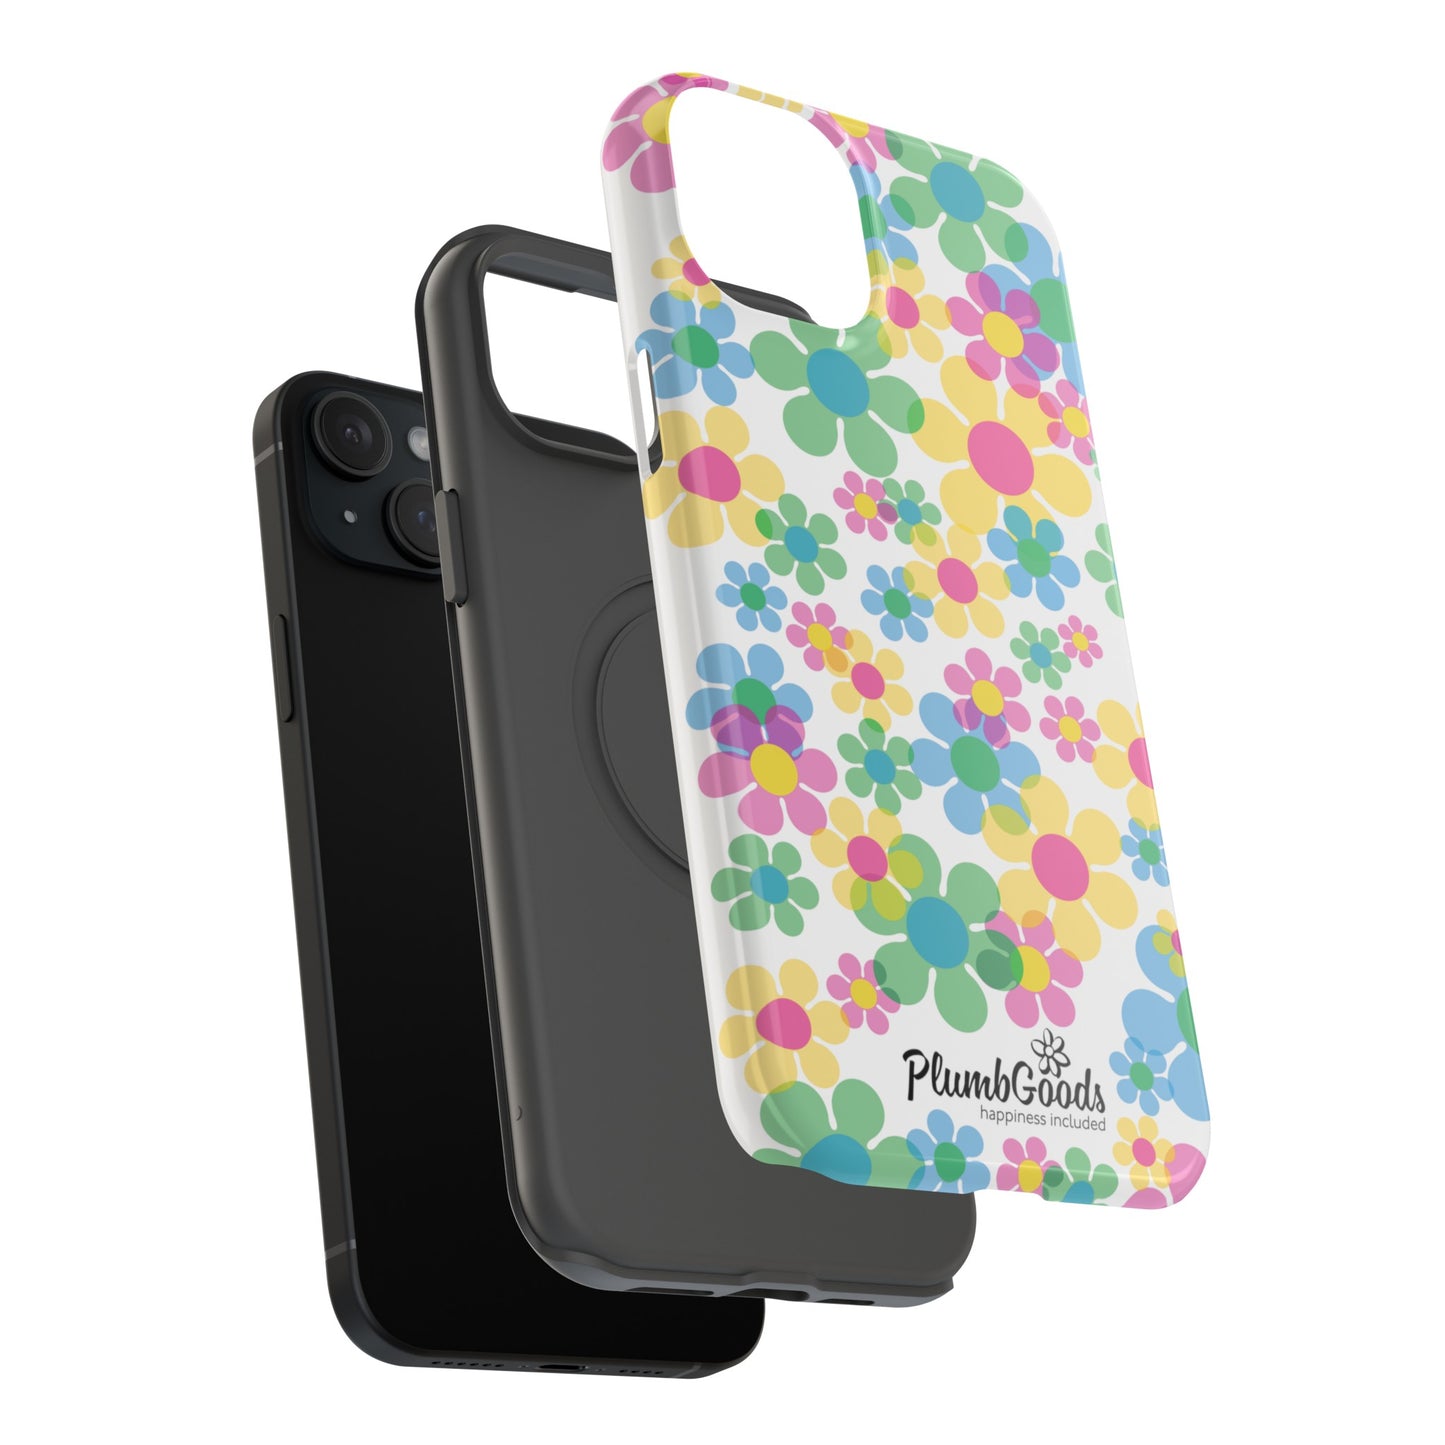 Impact-Resistant Floating Daises Case for Iphone & Samsung